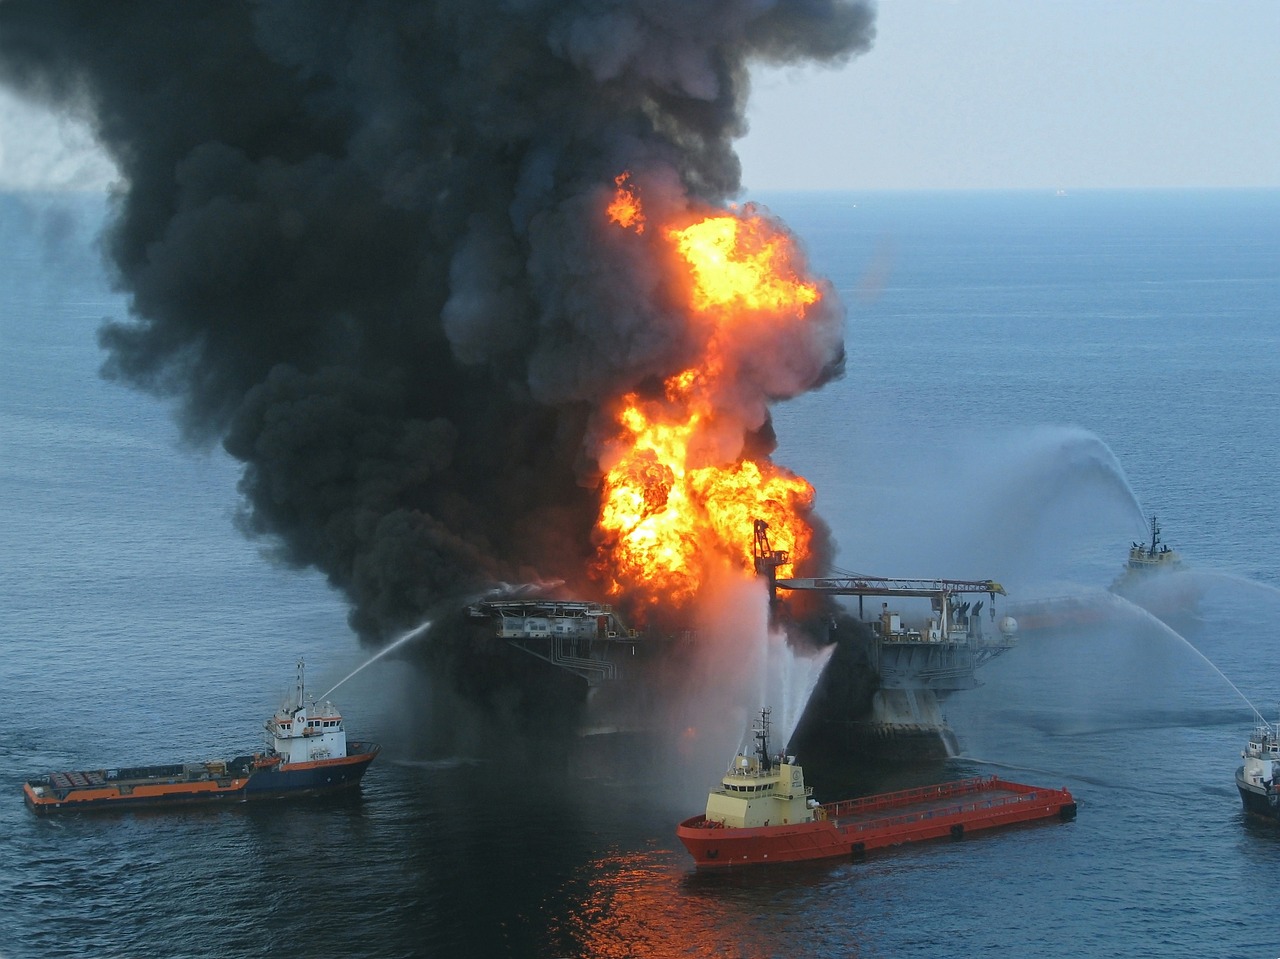 oil rig explosion fire disaster free photo